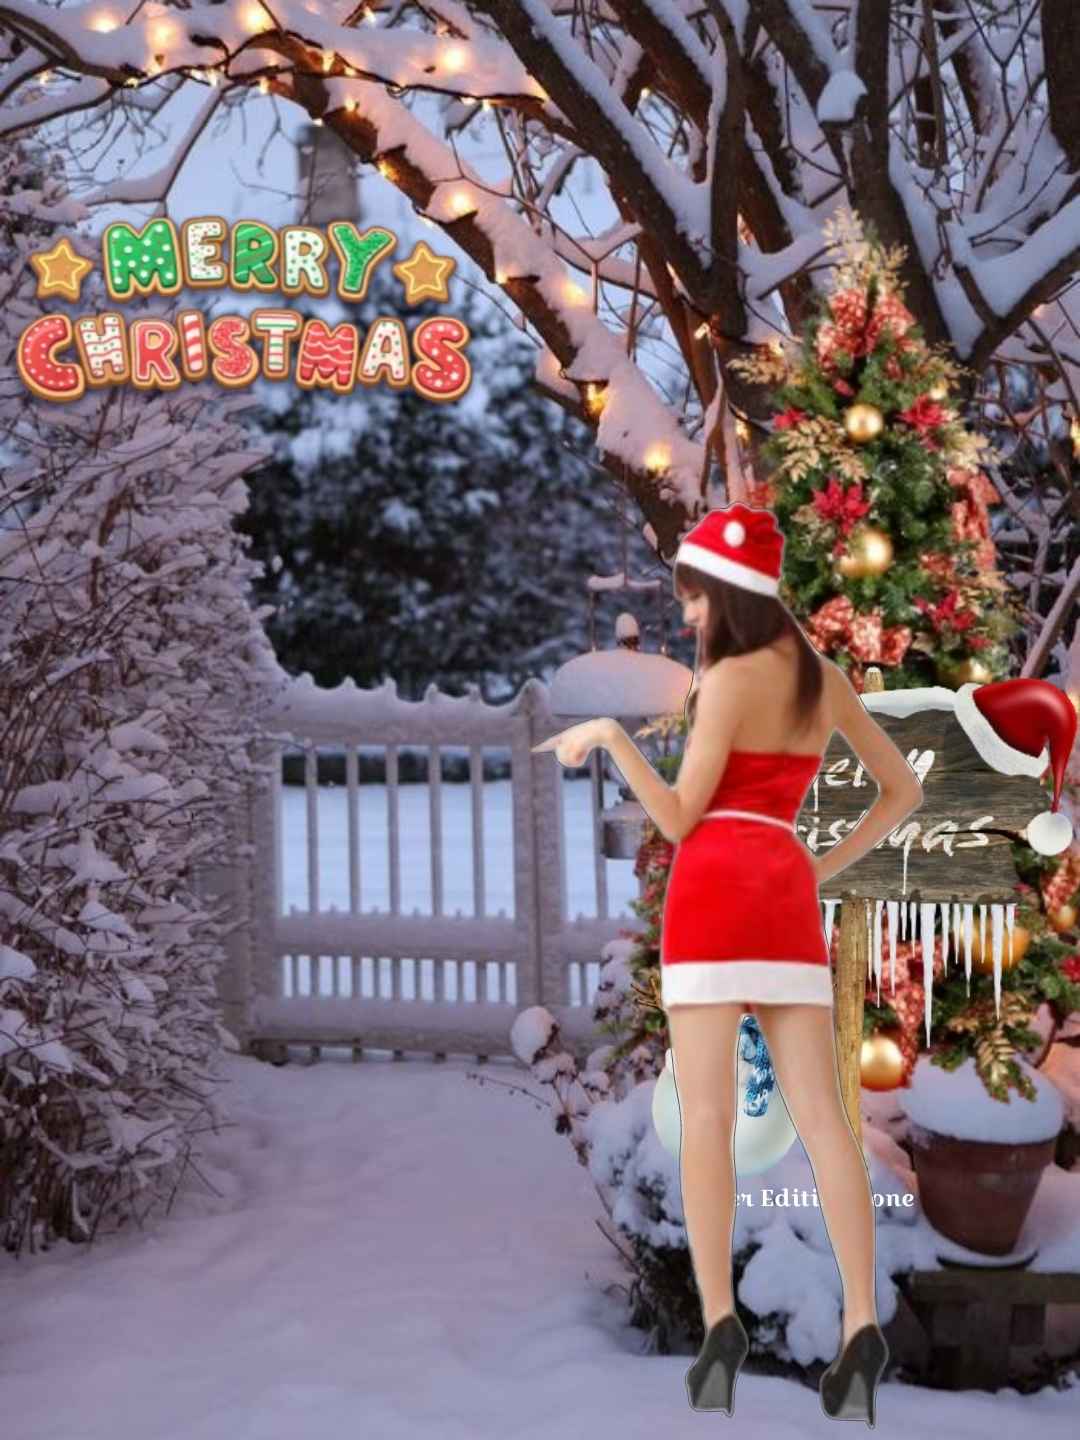 Merry Christmas Editing Background For CB Snapseed Photos